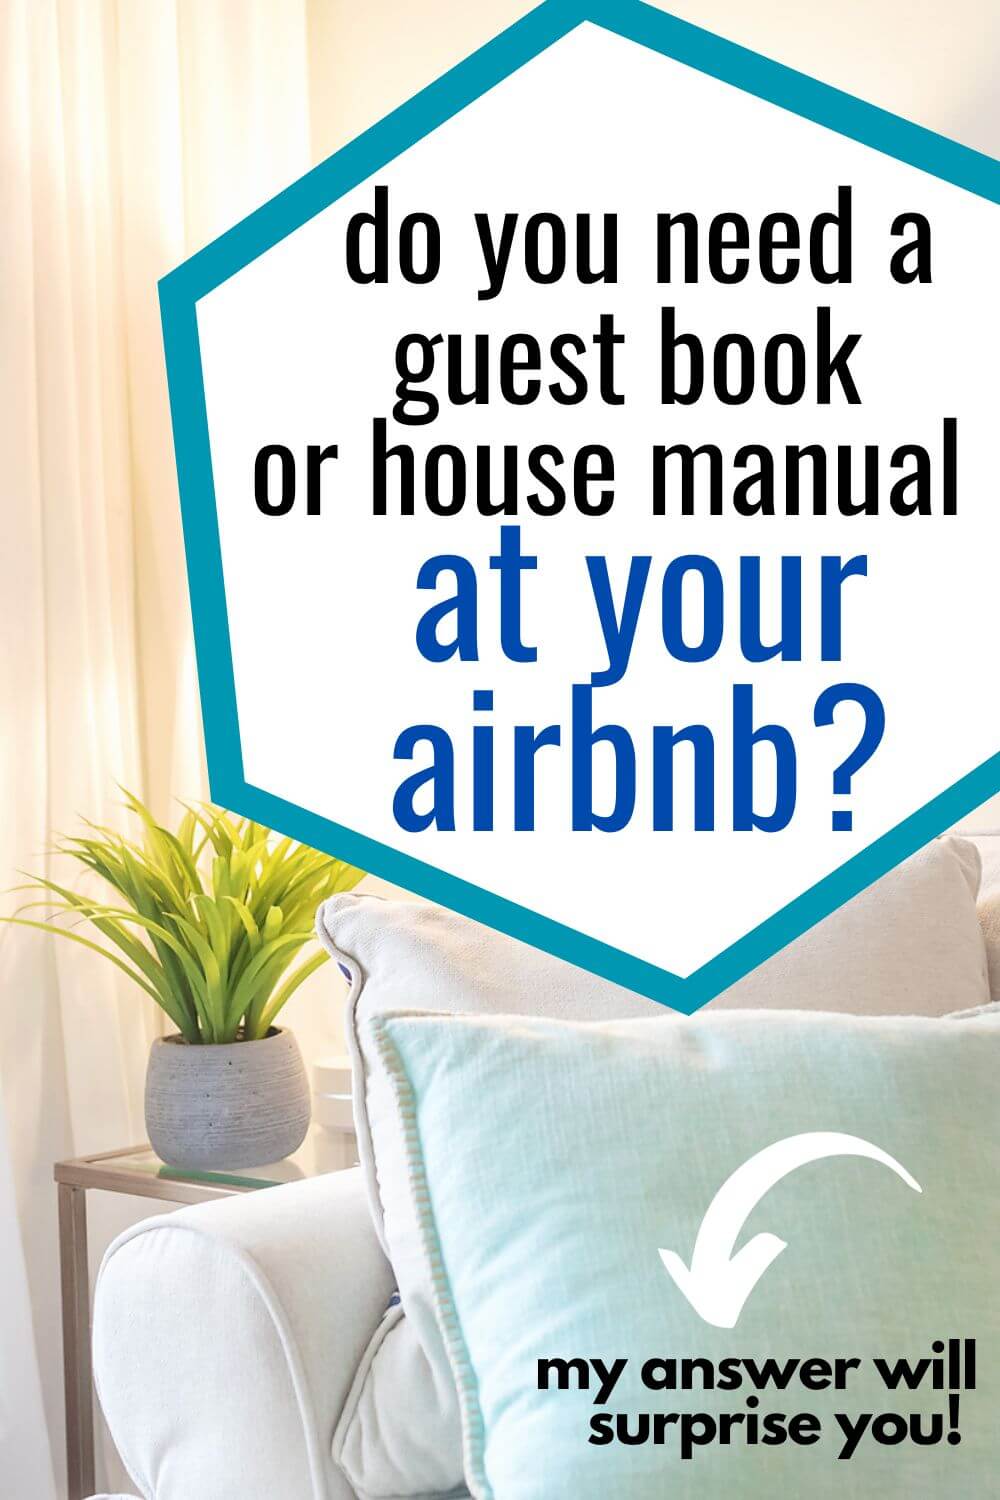 Do You Need An Airbnb Guest Book Or House Manual In Your Short-Term Rental?